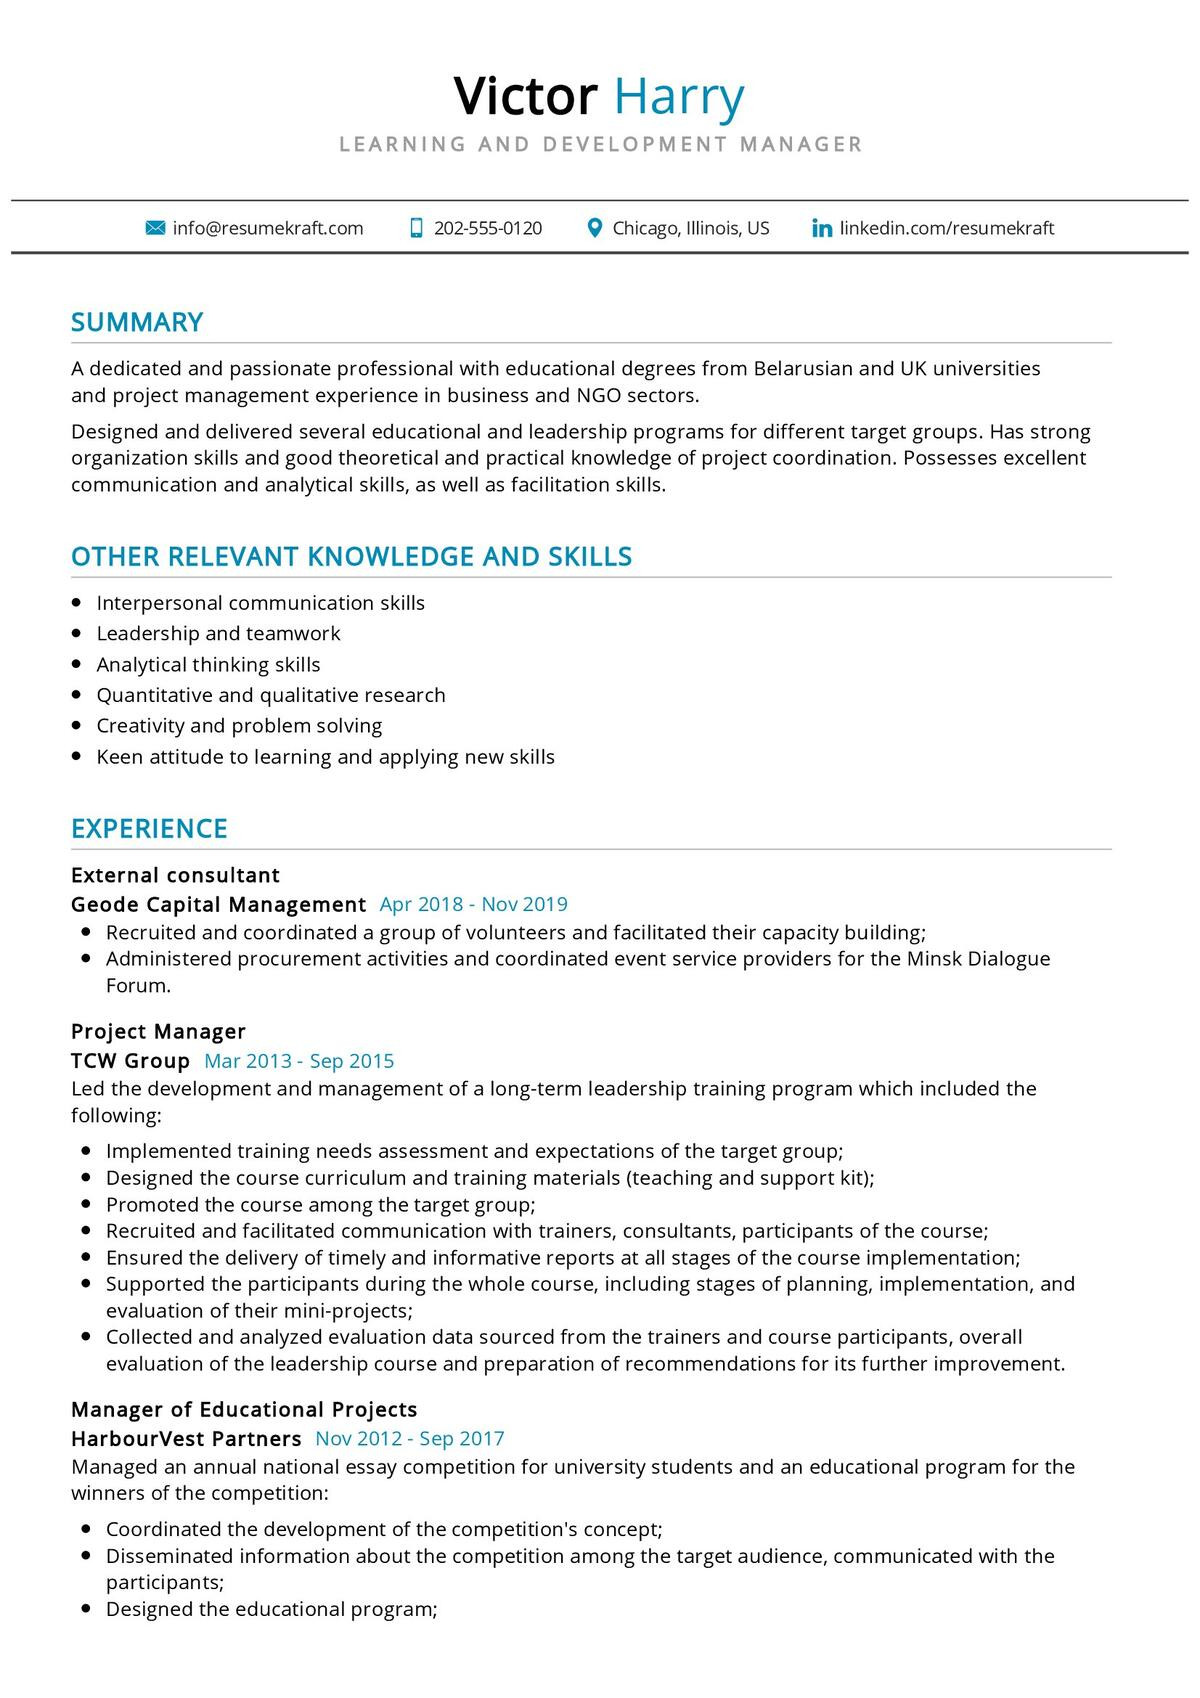 Learning and Development Specialist Resume Sample Learning and Development Manager Resume 2021 Writing Guide …